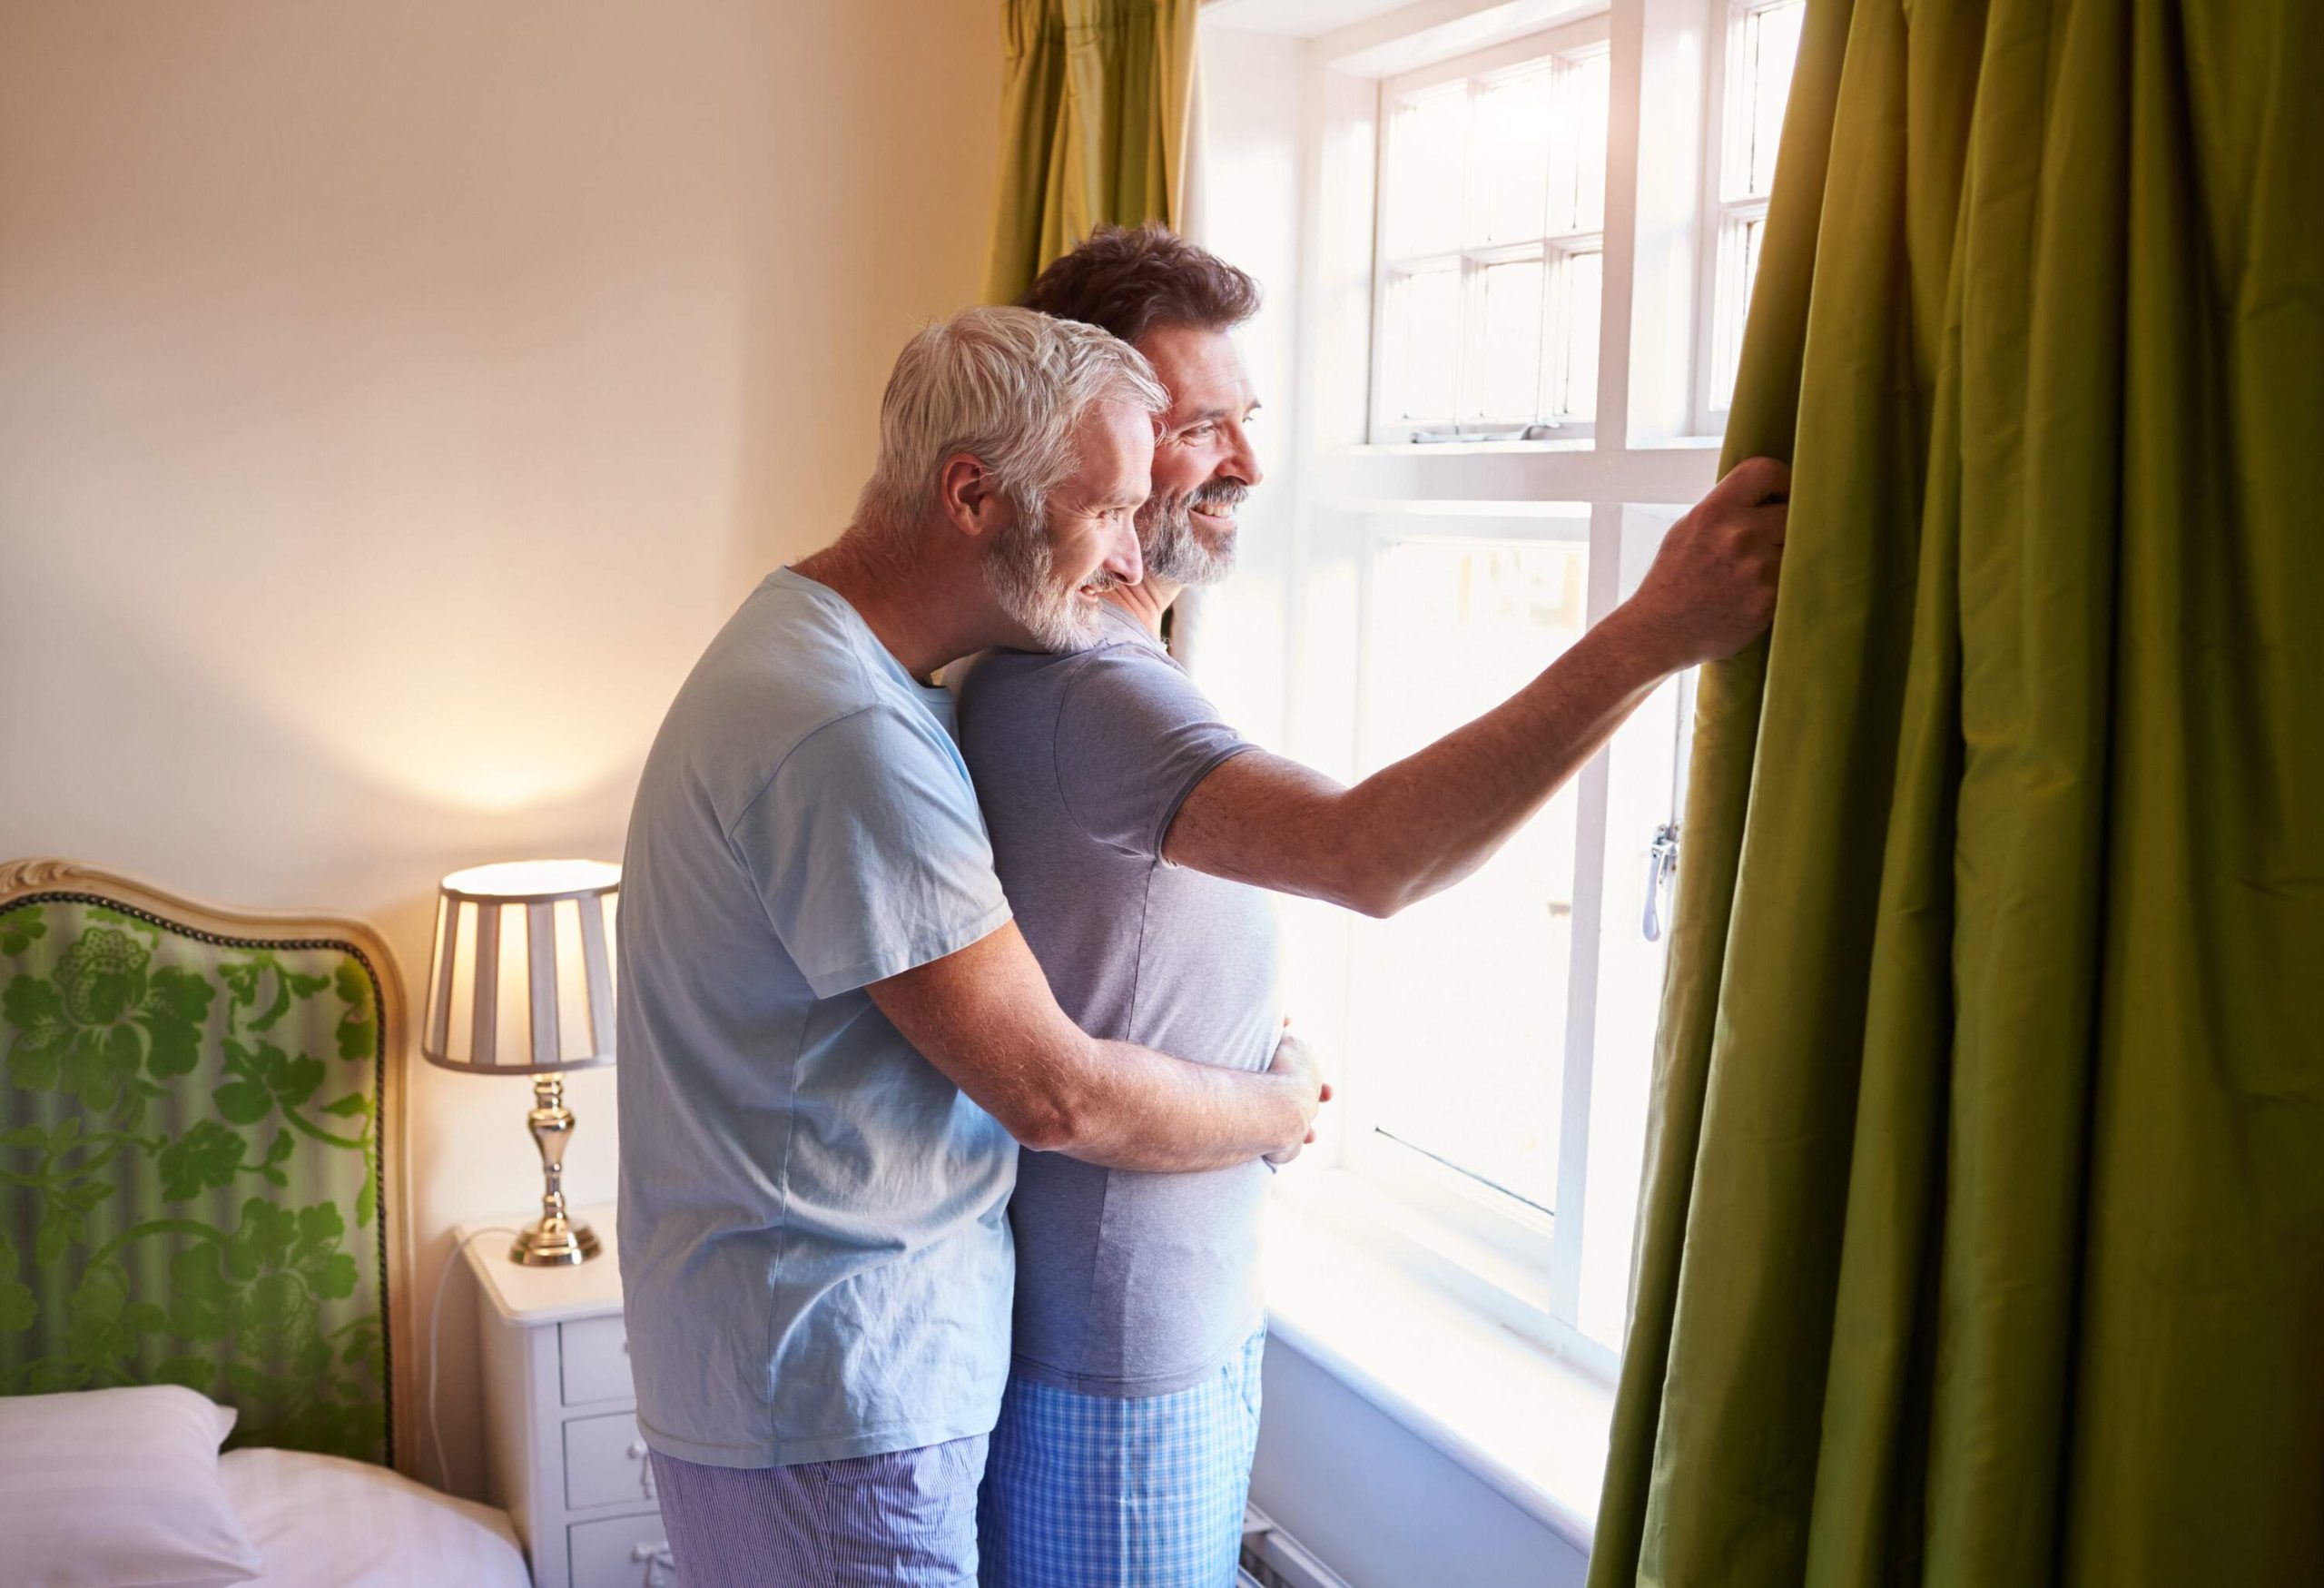 An elderly man gives his lover a back hug while looking out the hotel window.